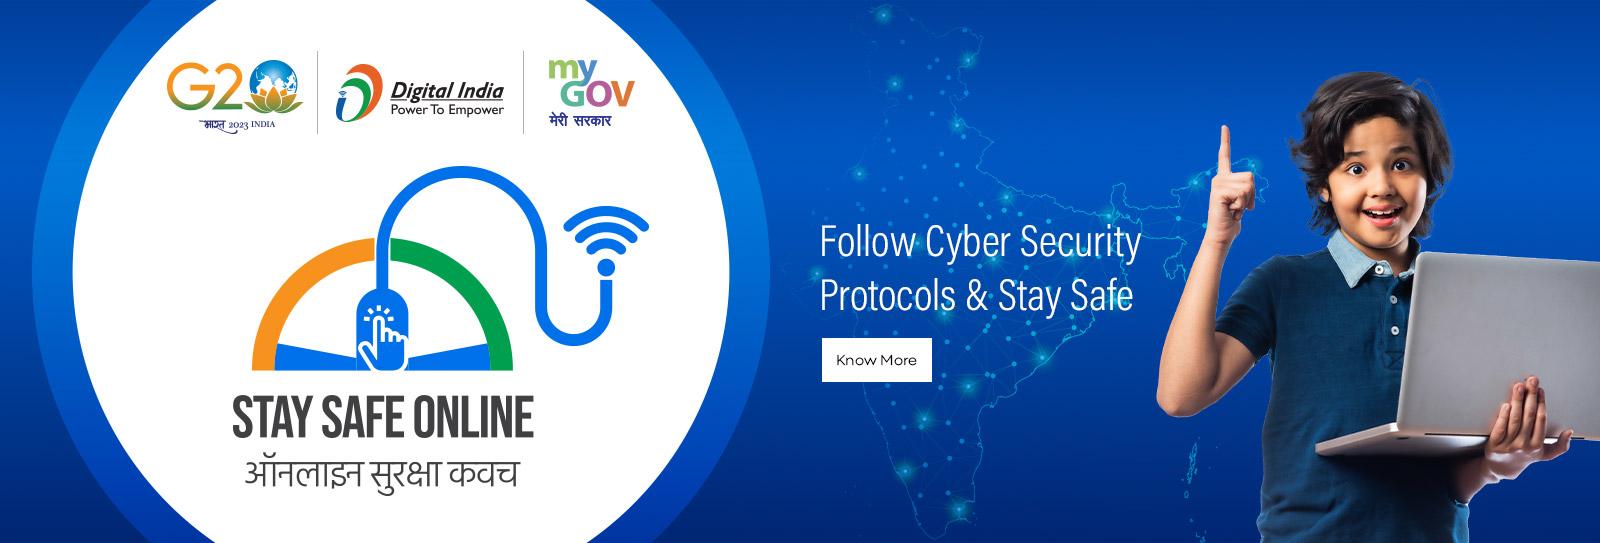 https://www.mygov.in/staysafeonline/?target=webview&type=campaign&nid=0